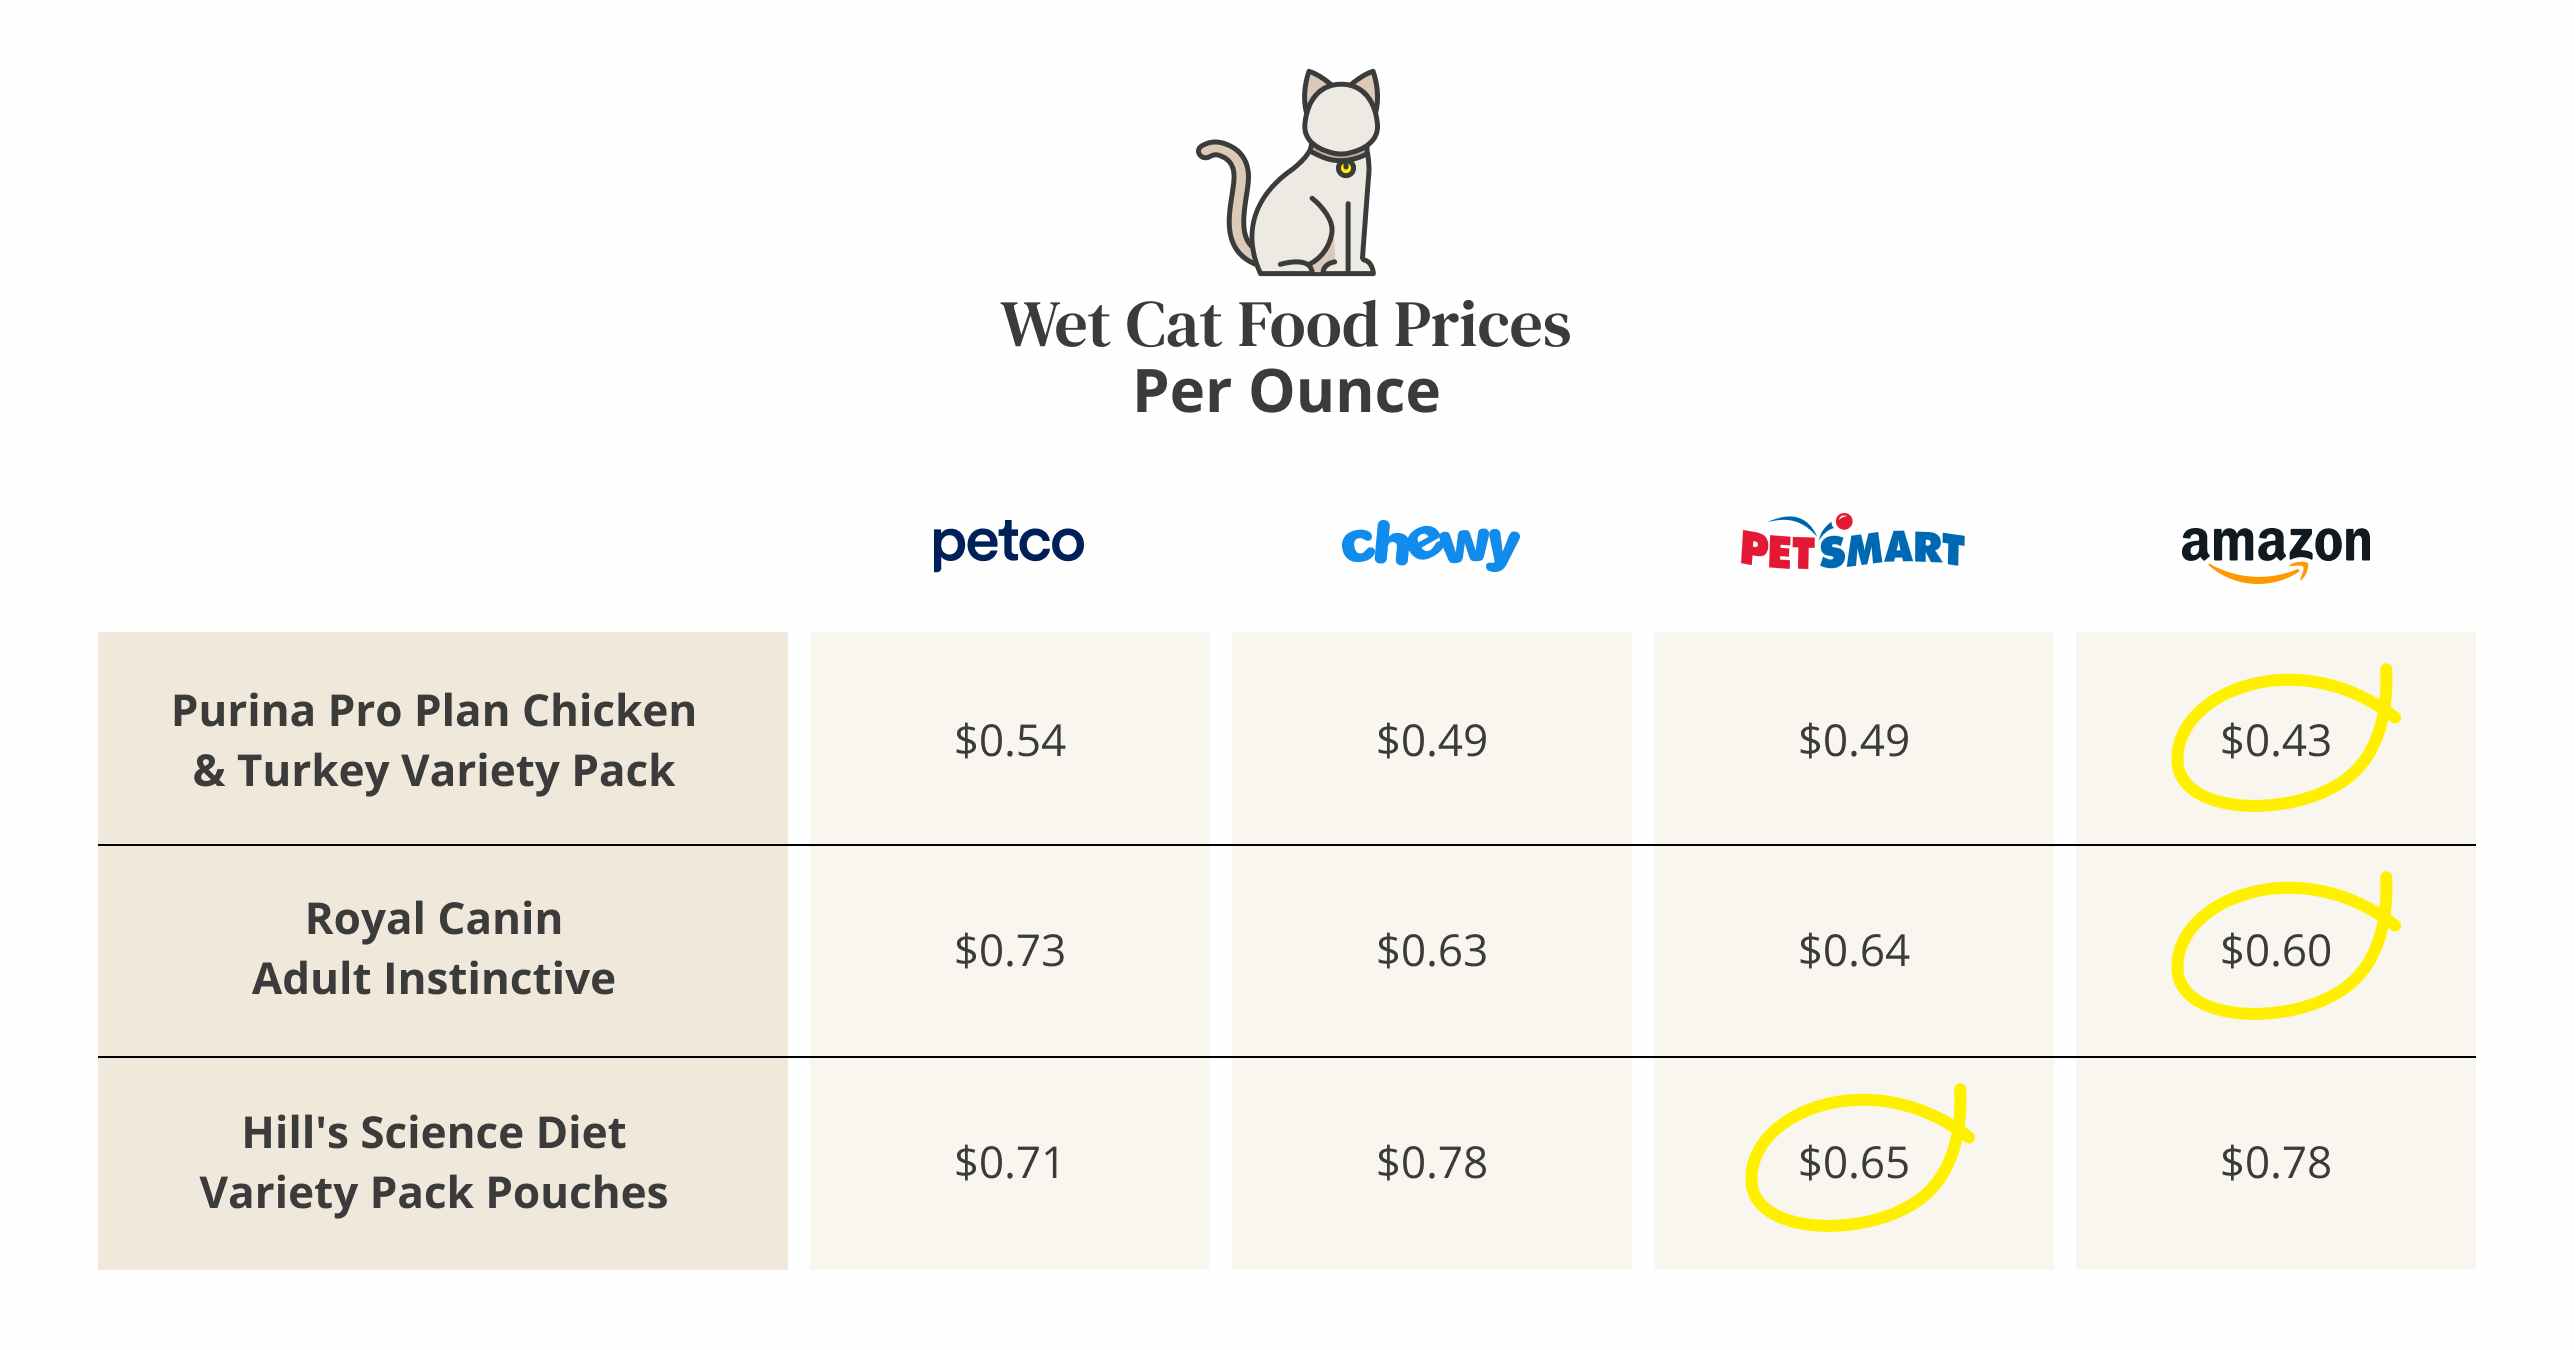 Comparing the costs of wet cat food per ounce at Petco, Chewy, PetSmart, and Amazon.